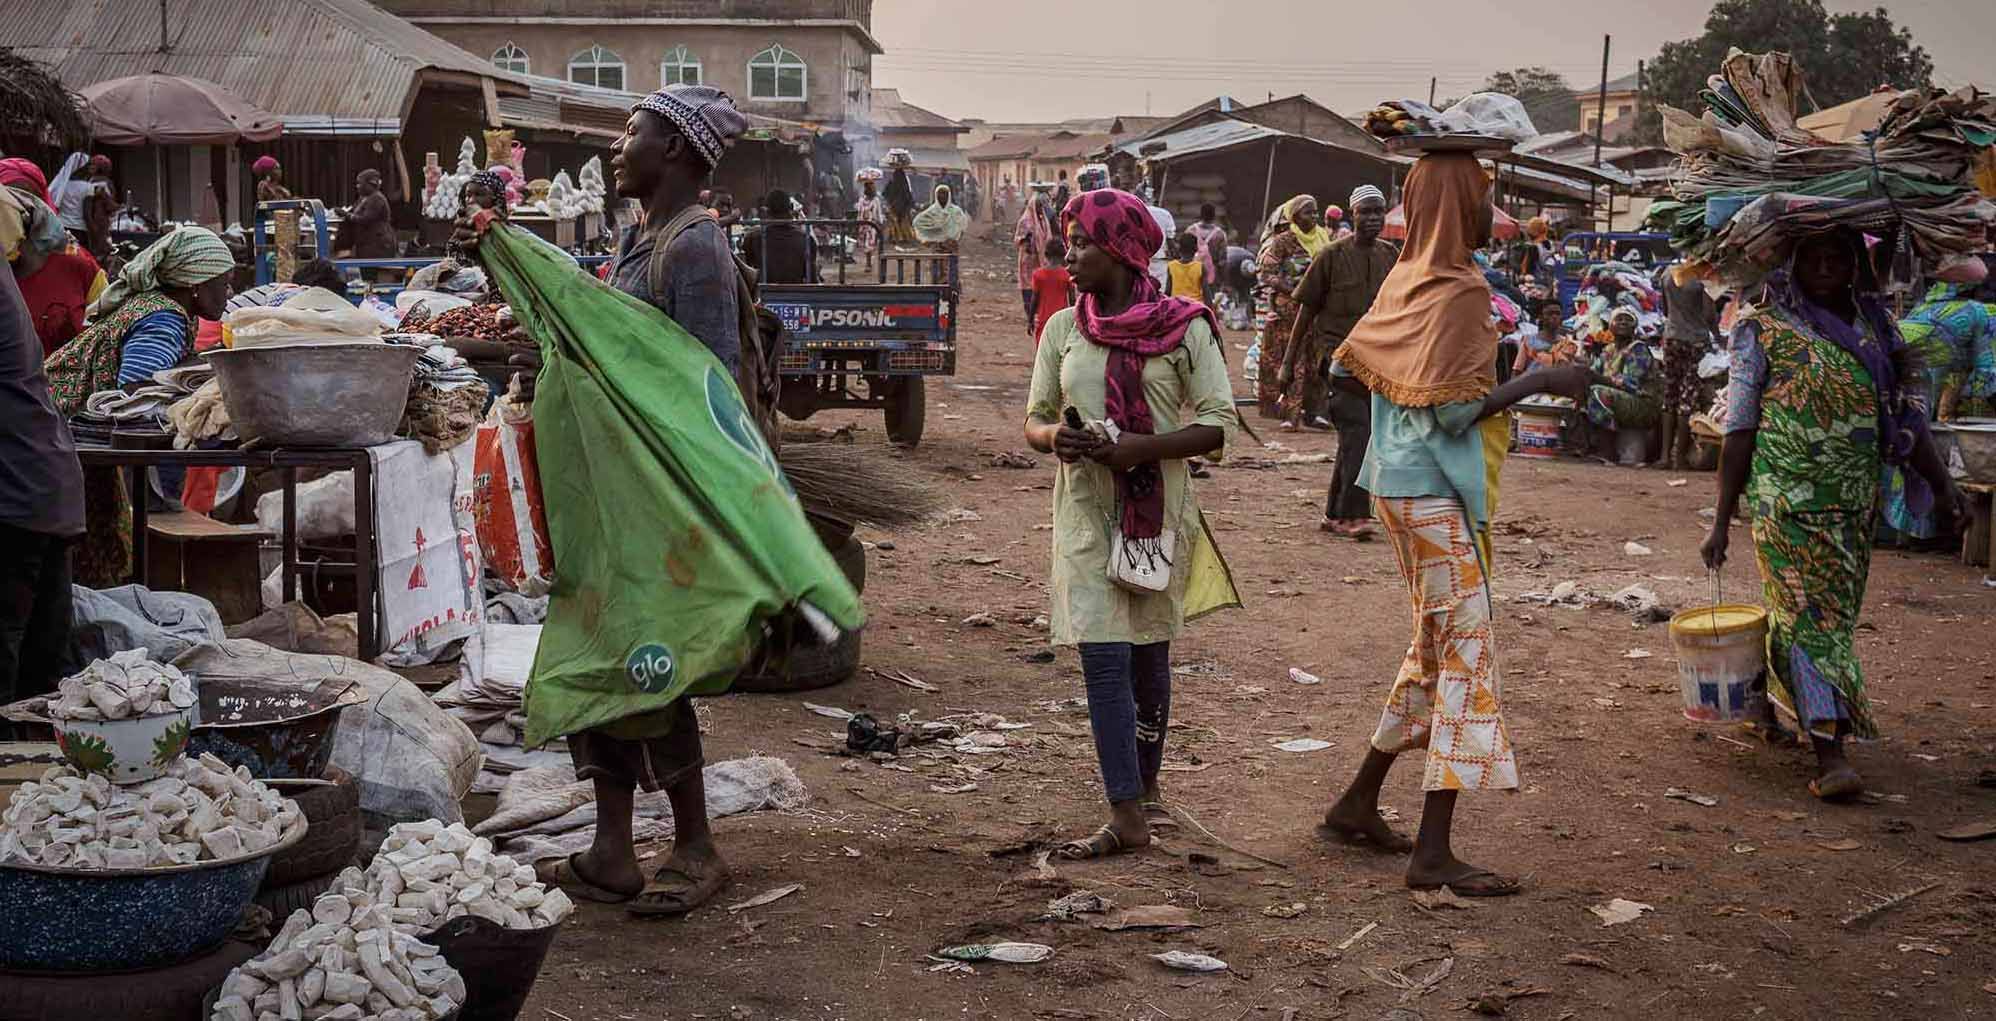 Women sell cowpea at this bustling grain and vegetable market in Tamale, Ghana’s third-largest city. Ninety percent of Ghana’s cowpea is grown in the northern part of the country. Image by Ankur Paliwal. Ghana, 2019.